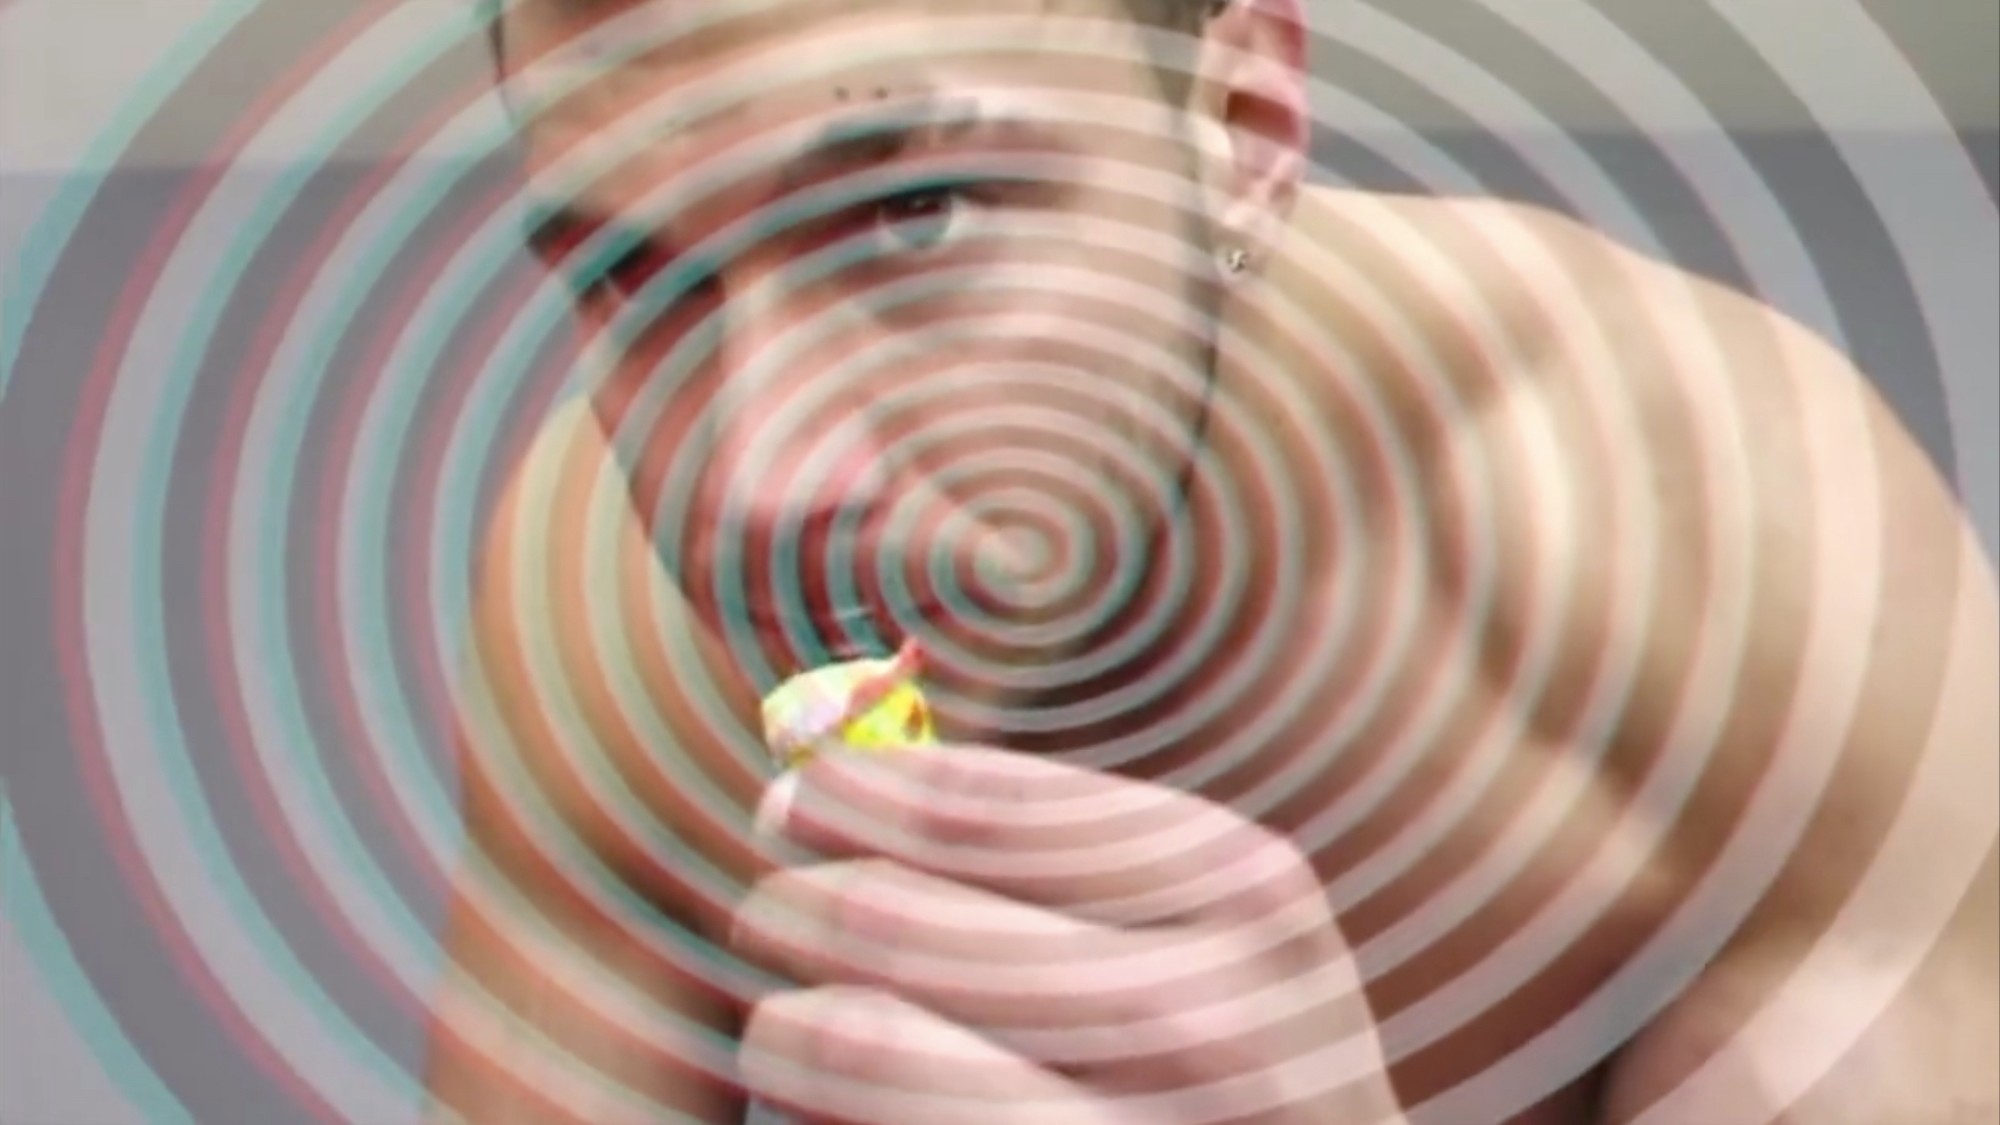 Poppers Training Videos Take the Drug to Terrifying New ...